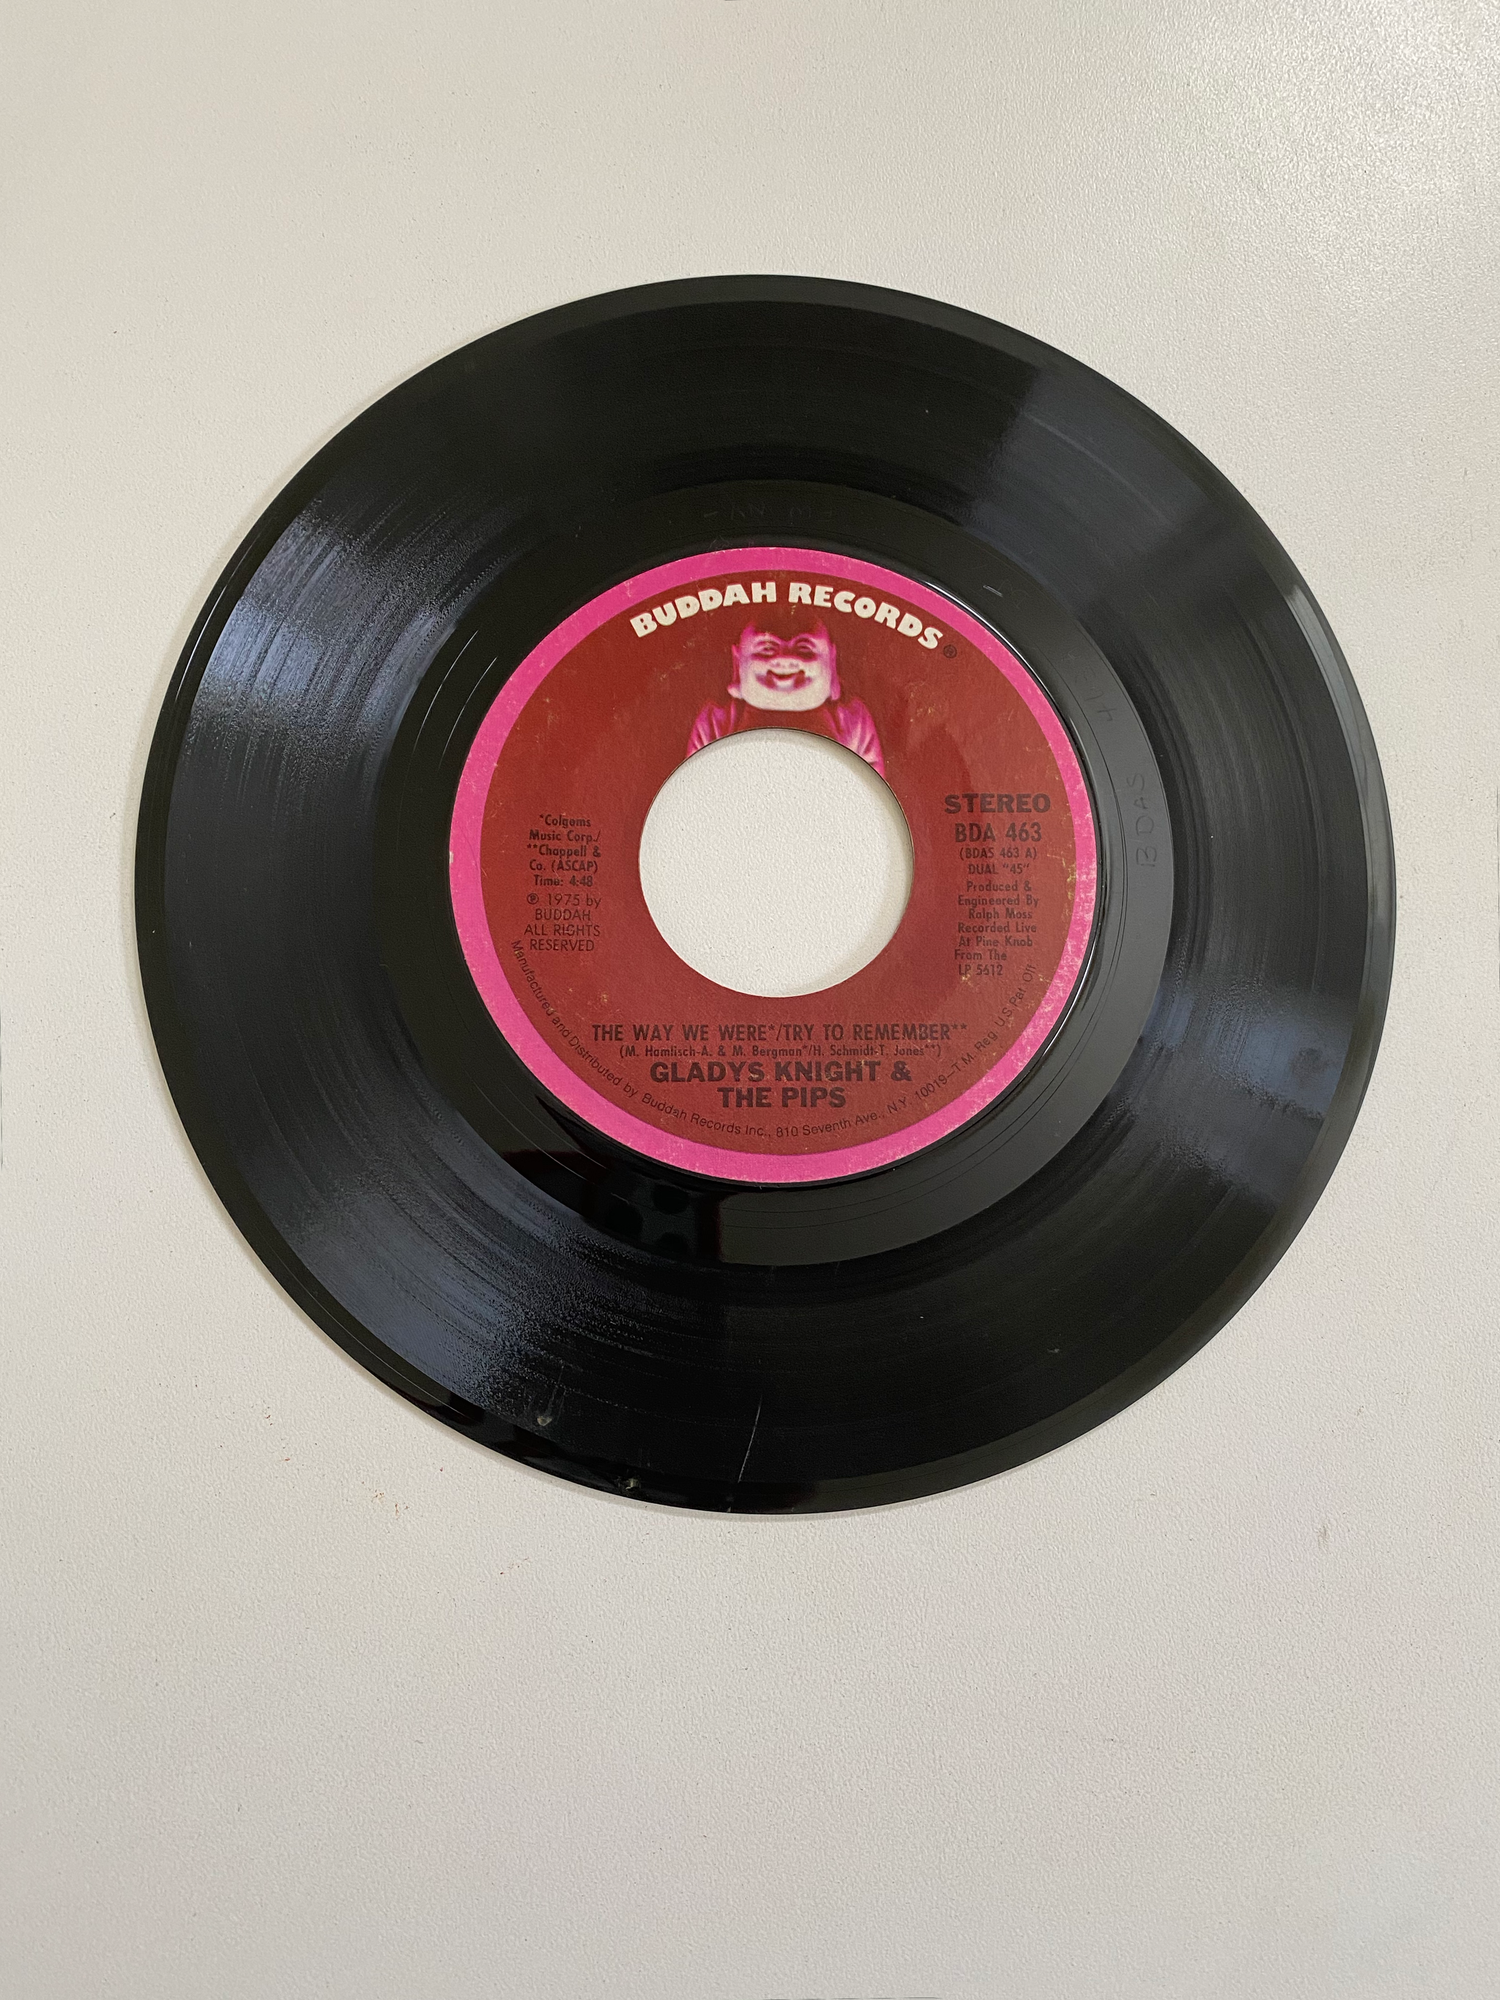 Gladys Knight and The Pips - The Way We Were/Try to Remember | 45 The Vintedge Co.